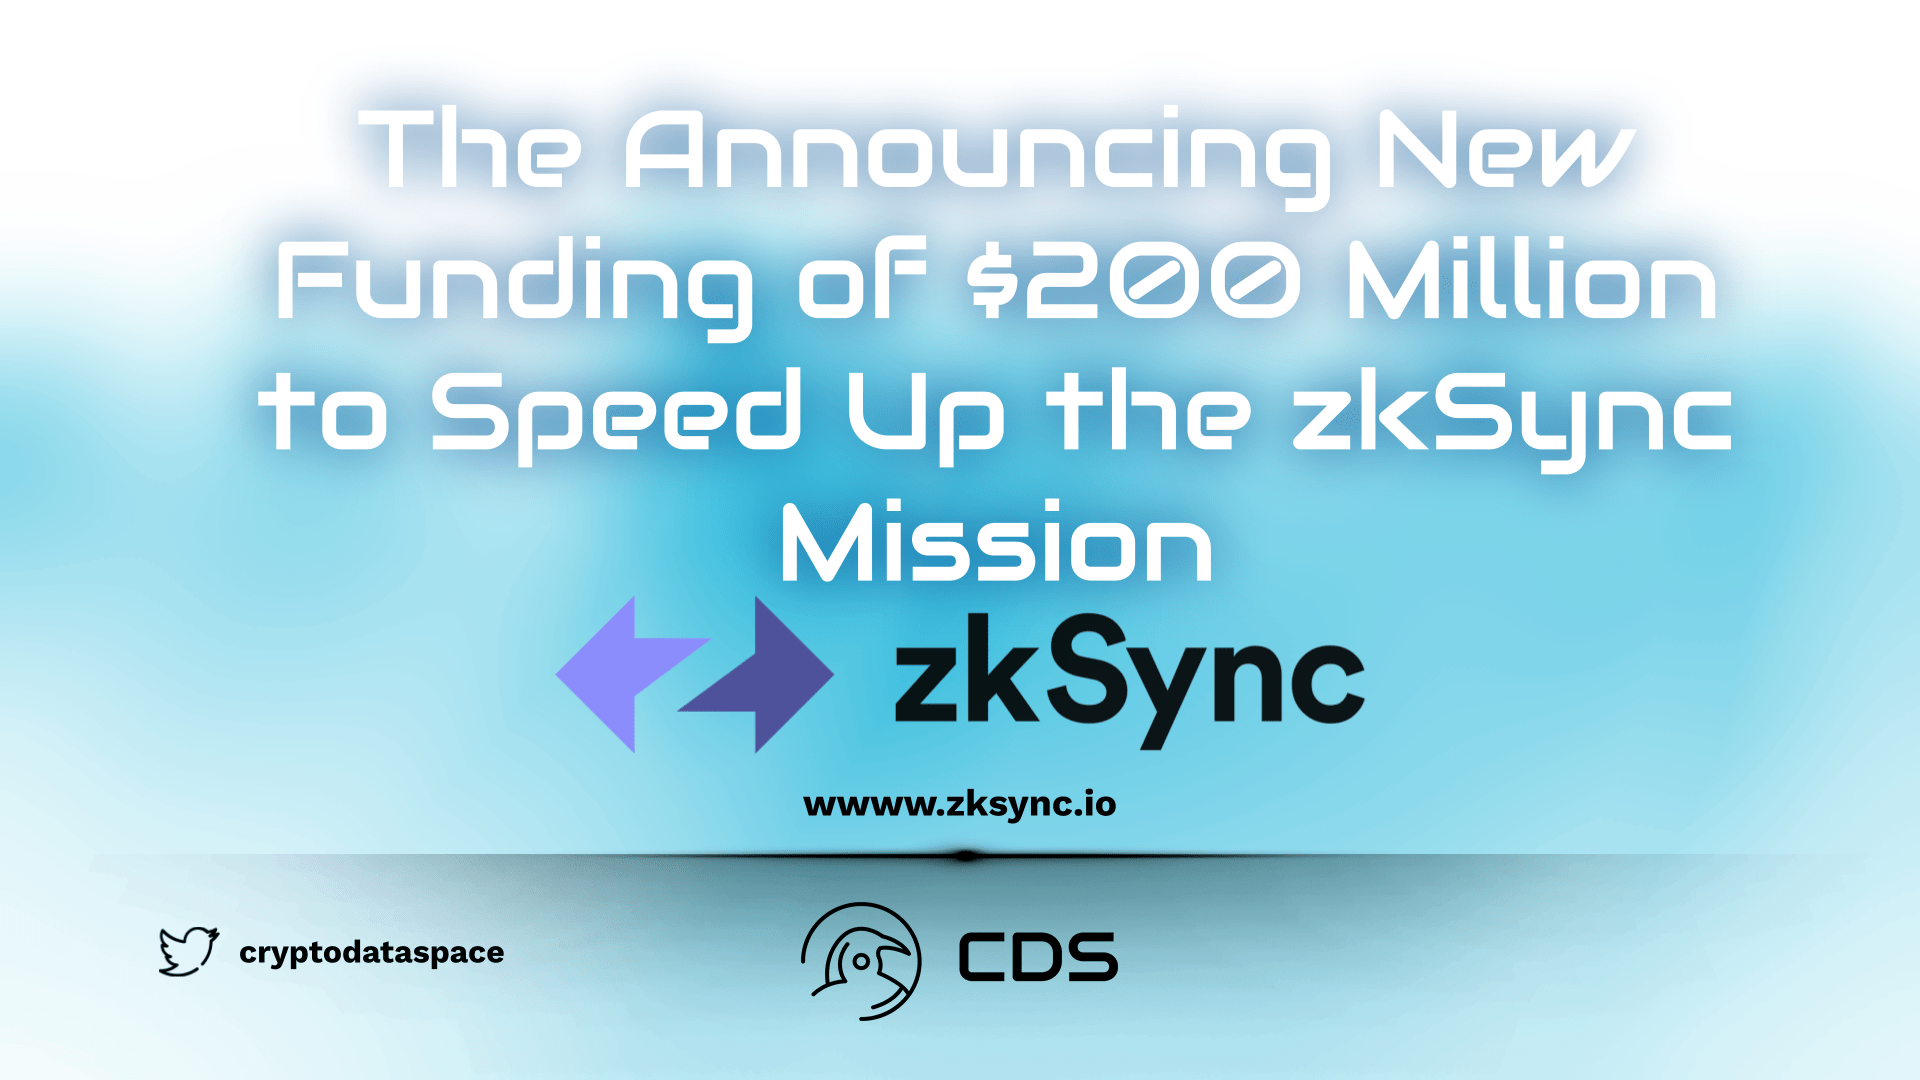 The Announcing New Funding of $200 Million to Speed Up the zkSync Mission